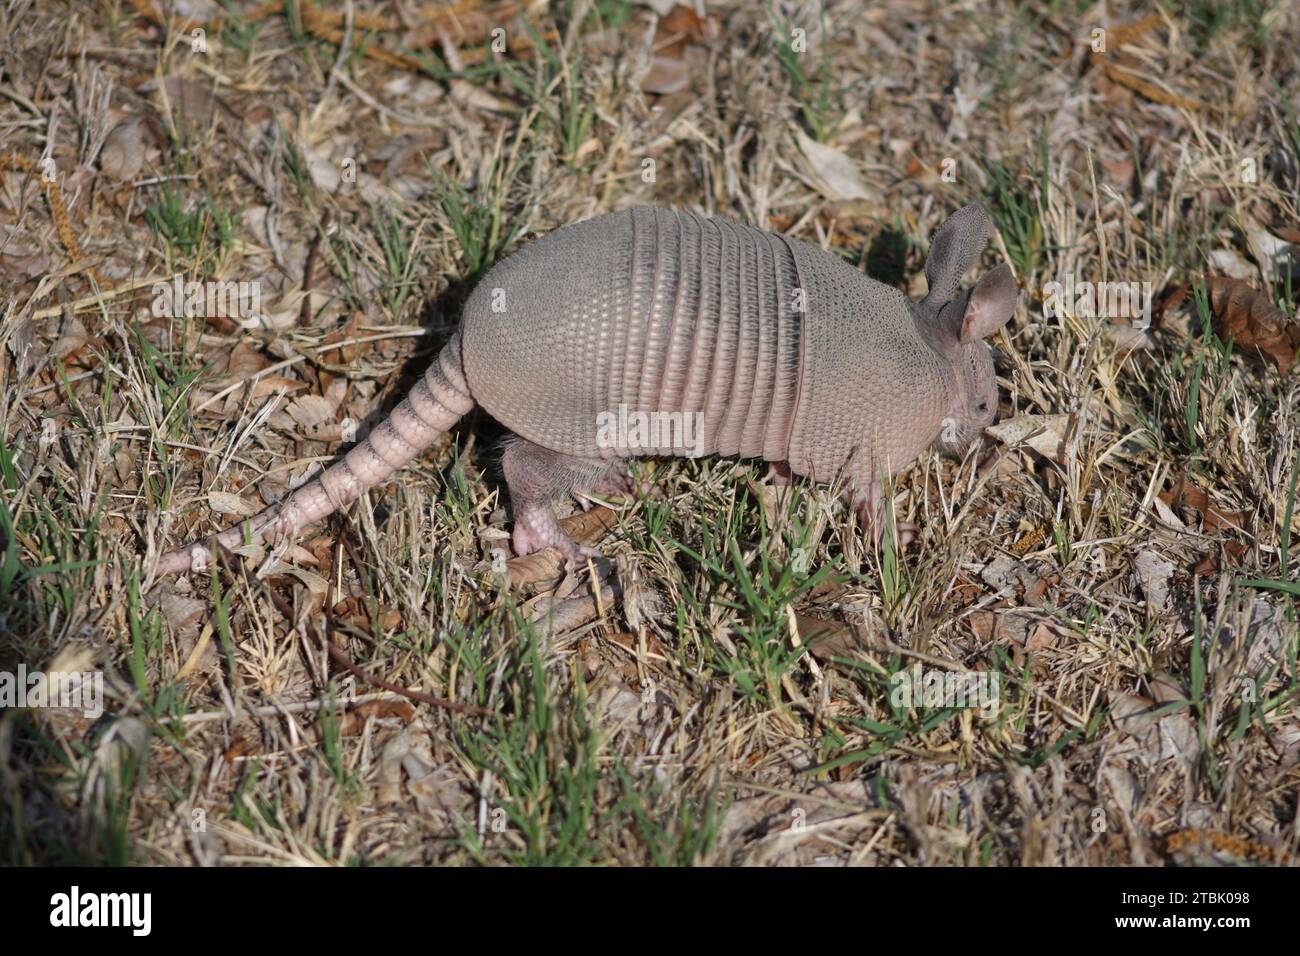 picture of a armadillo at a ranch Stock Photo